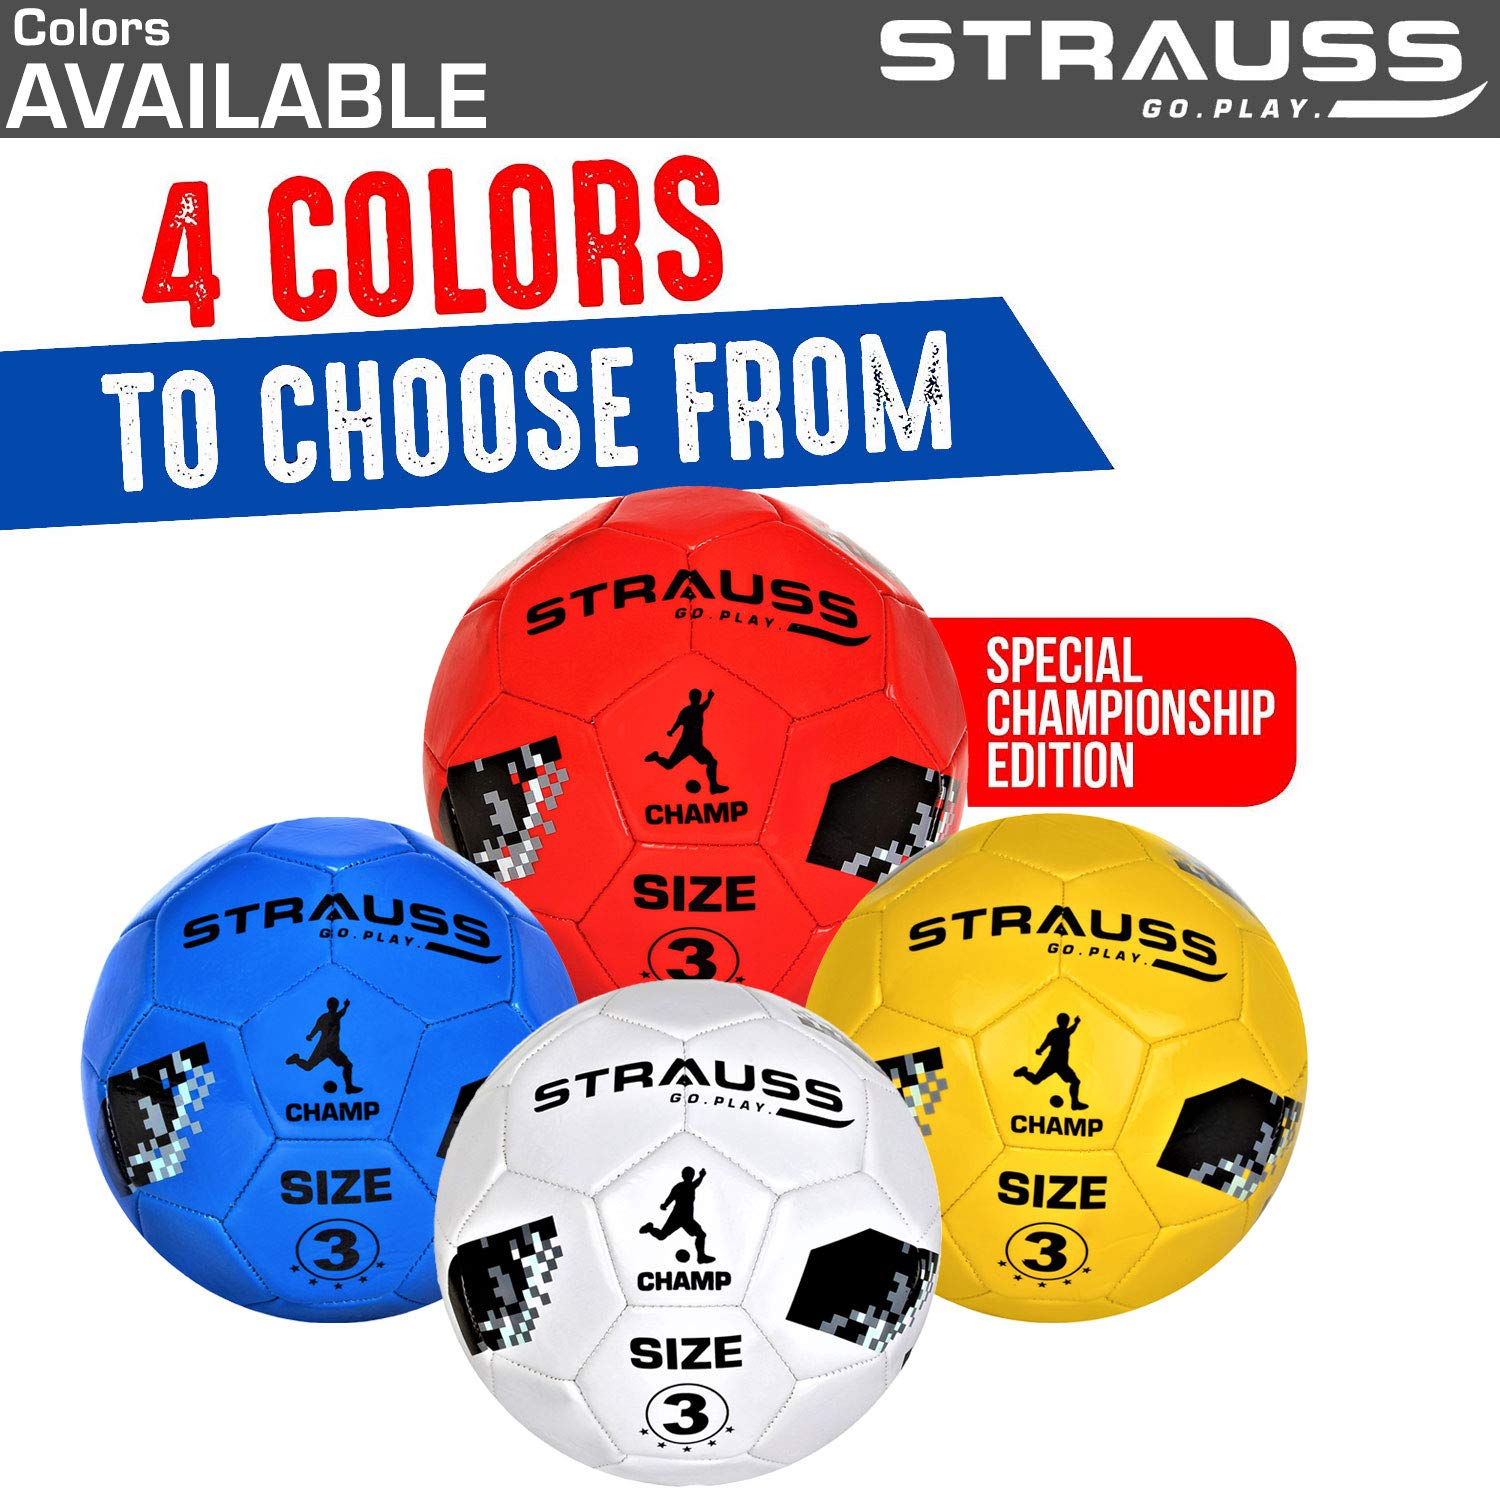 Strauss Official Basketball Size 3 | Professional Match Ball for Indoor & Outdoor Games & Training for Kids & Adults | Superior & Soft Grip with Granular Texture & High-Performance Grained Rubber Surface, (White)